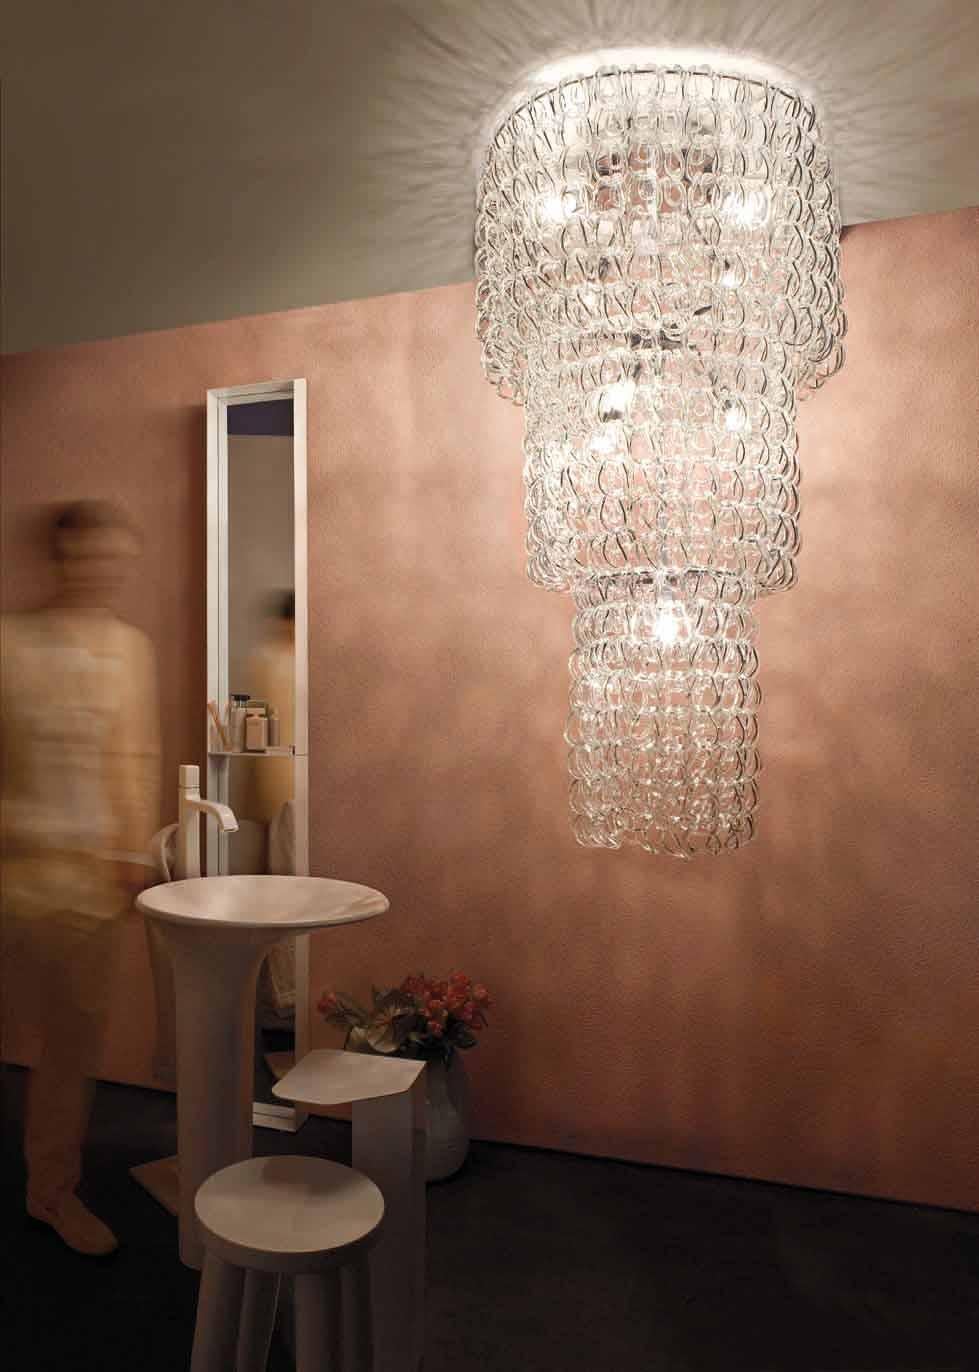 The Giogali collection is a decorative lighting system based on a single element: the handmade glass link. Featured Cascade chandelier in crystal. Metal parts in chrome. E26 lighting.